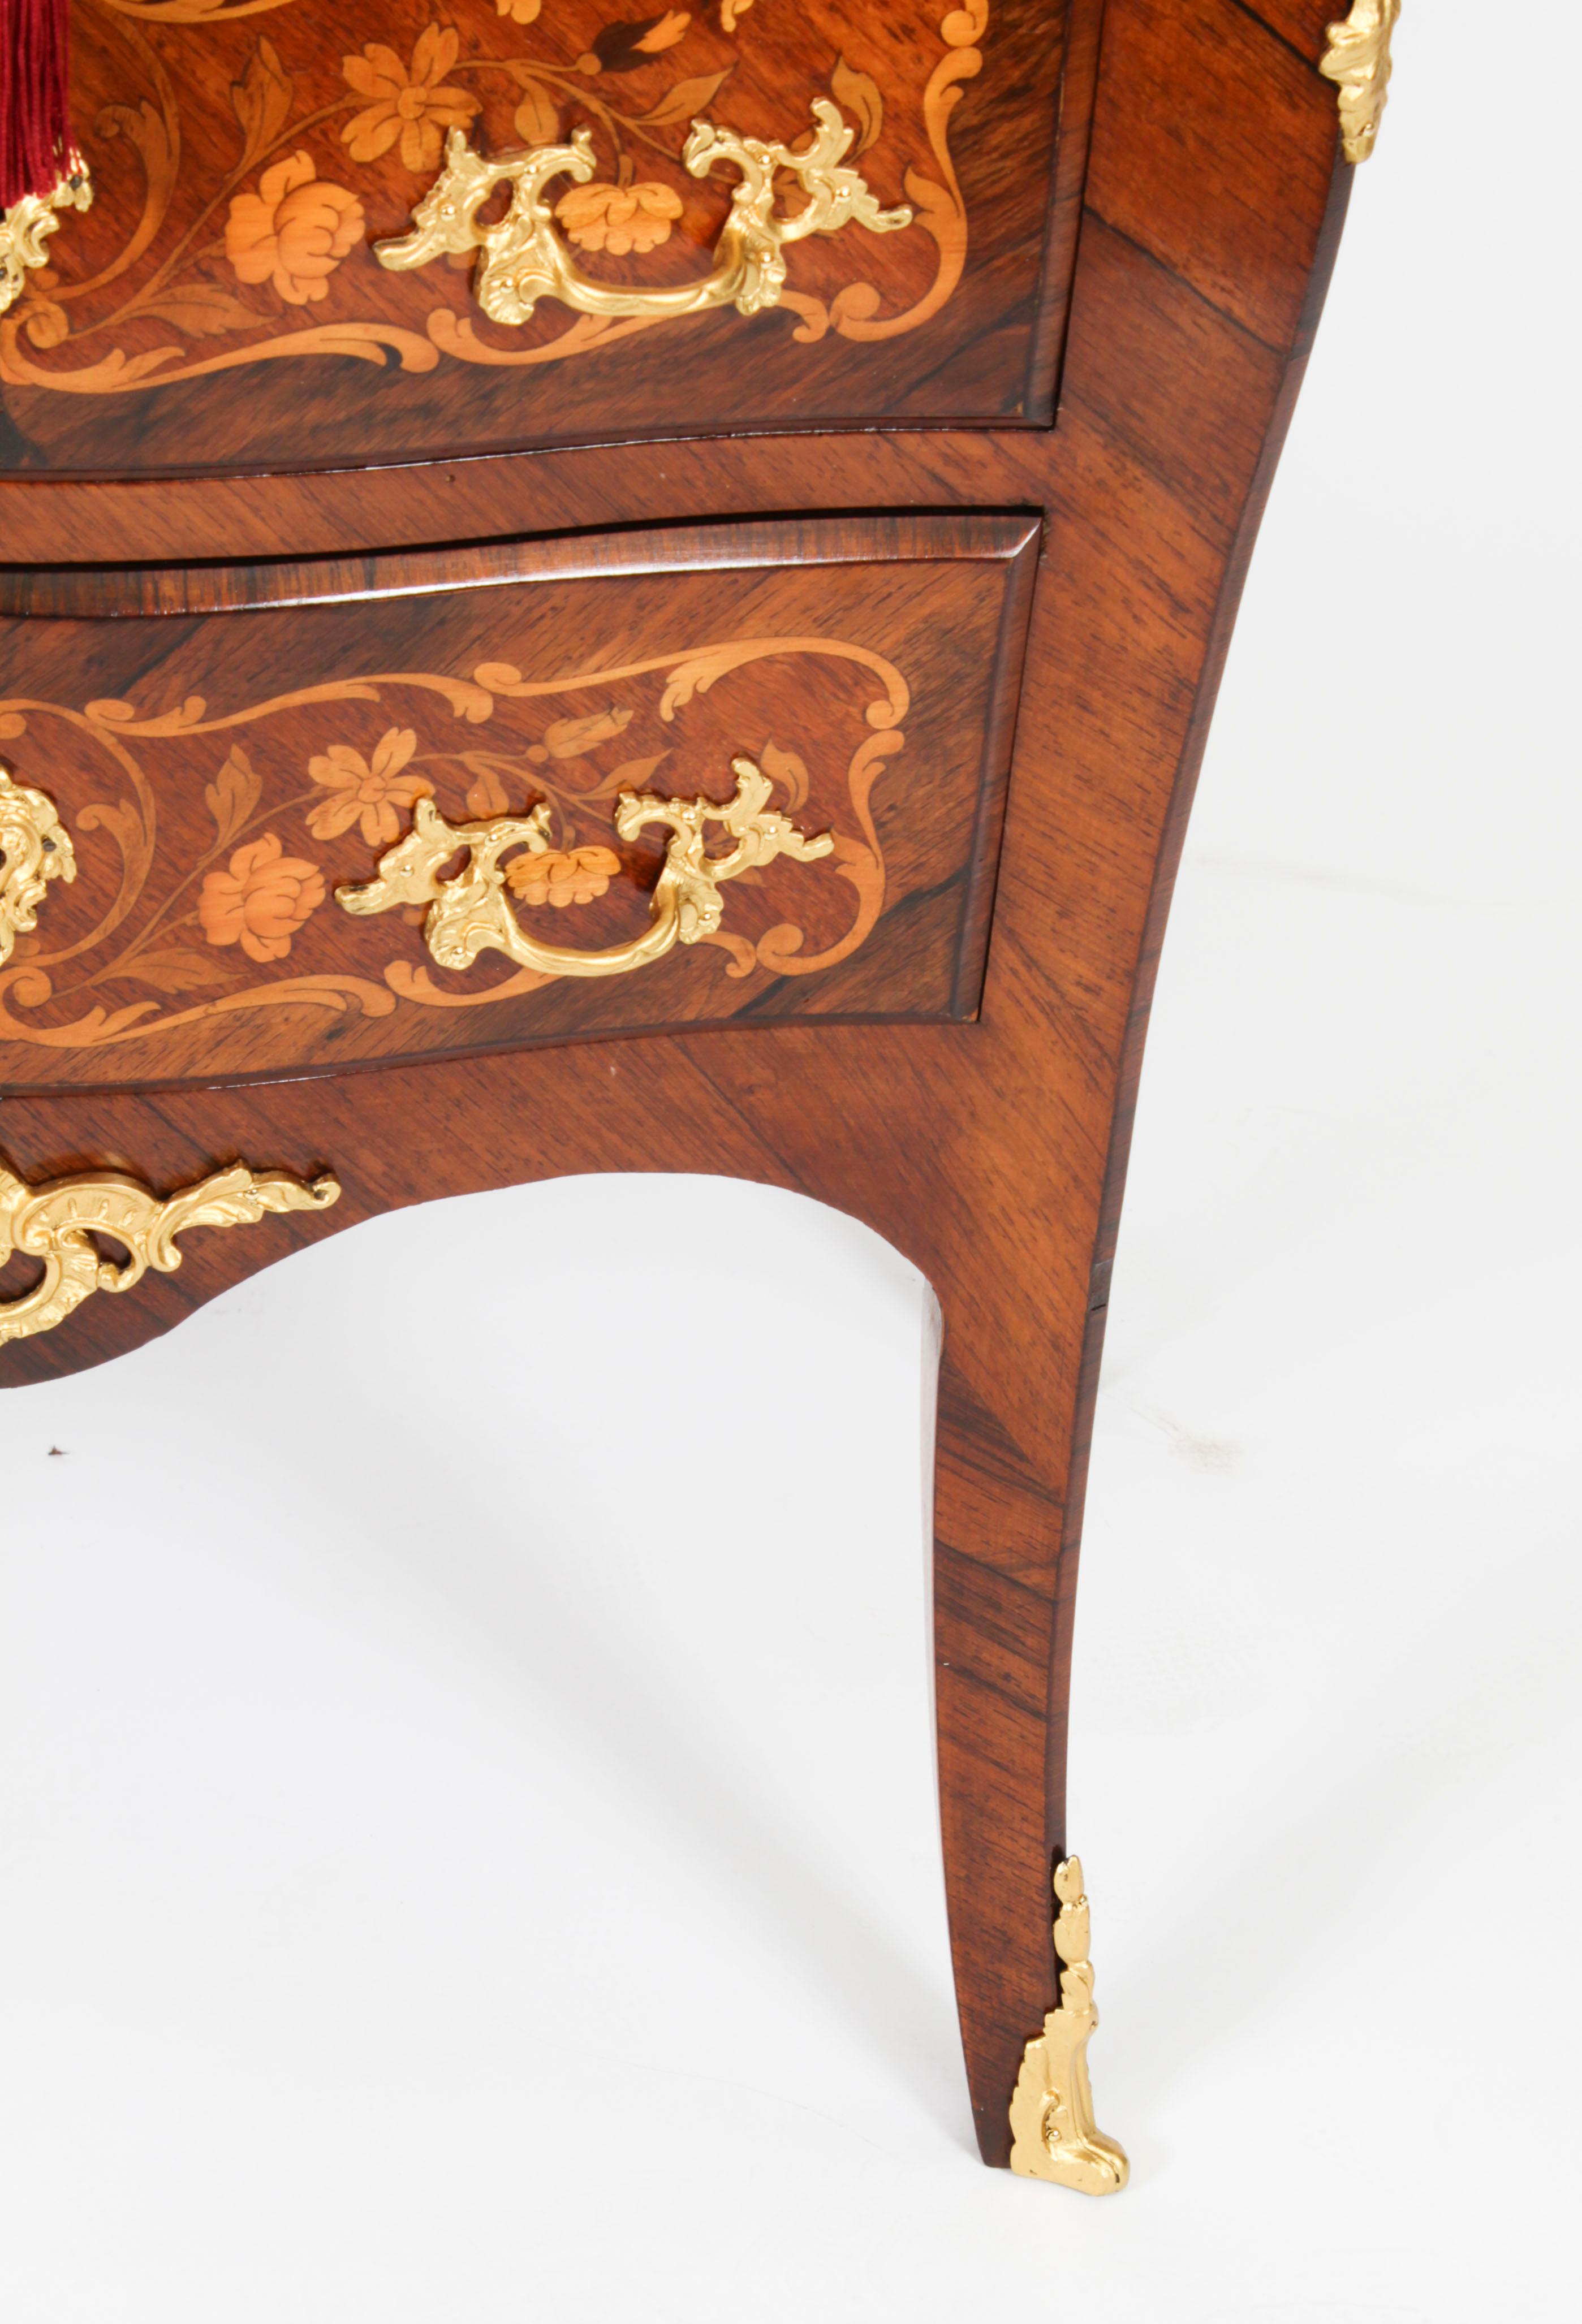 Antique French Louis Revival Gonçalo Alvest Marquetry Commode 19th Century For Sale 5